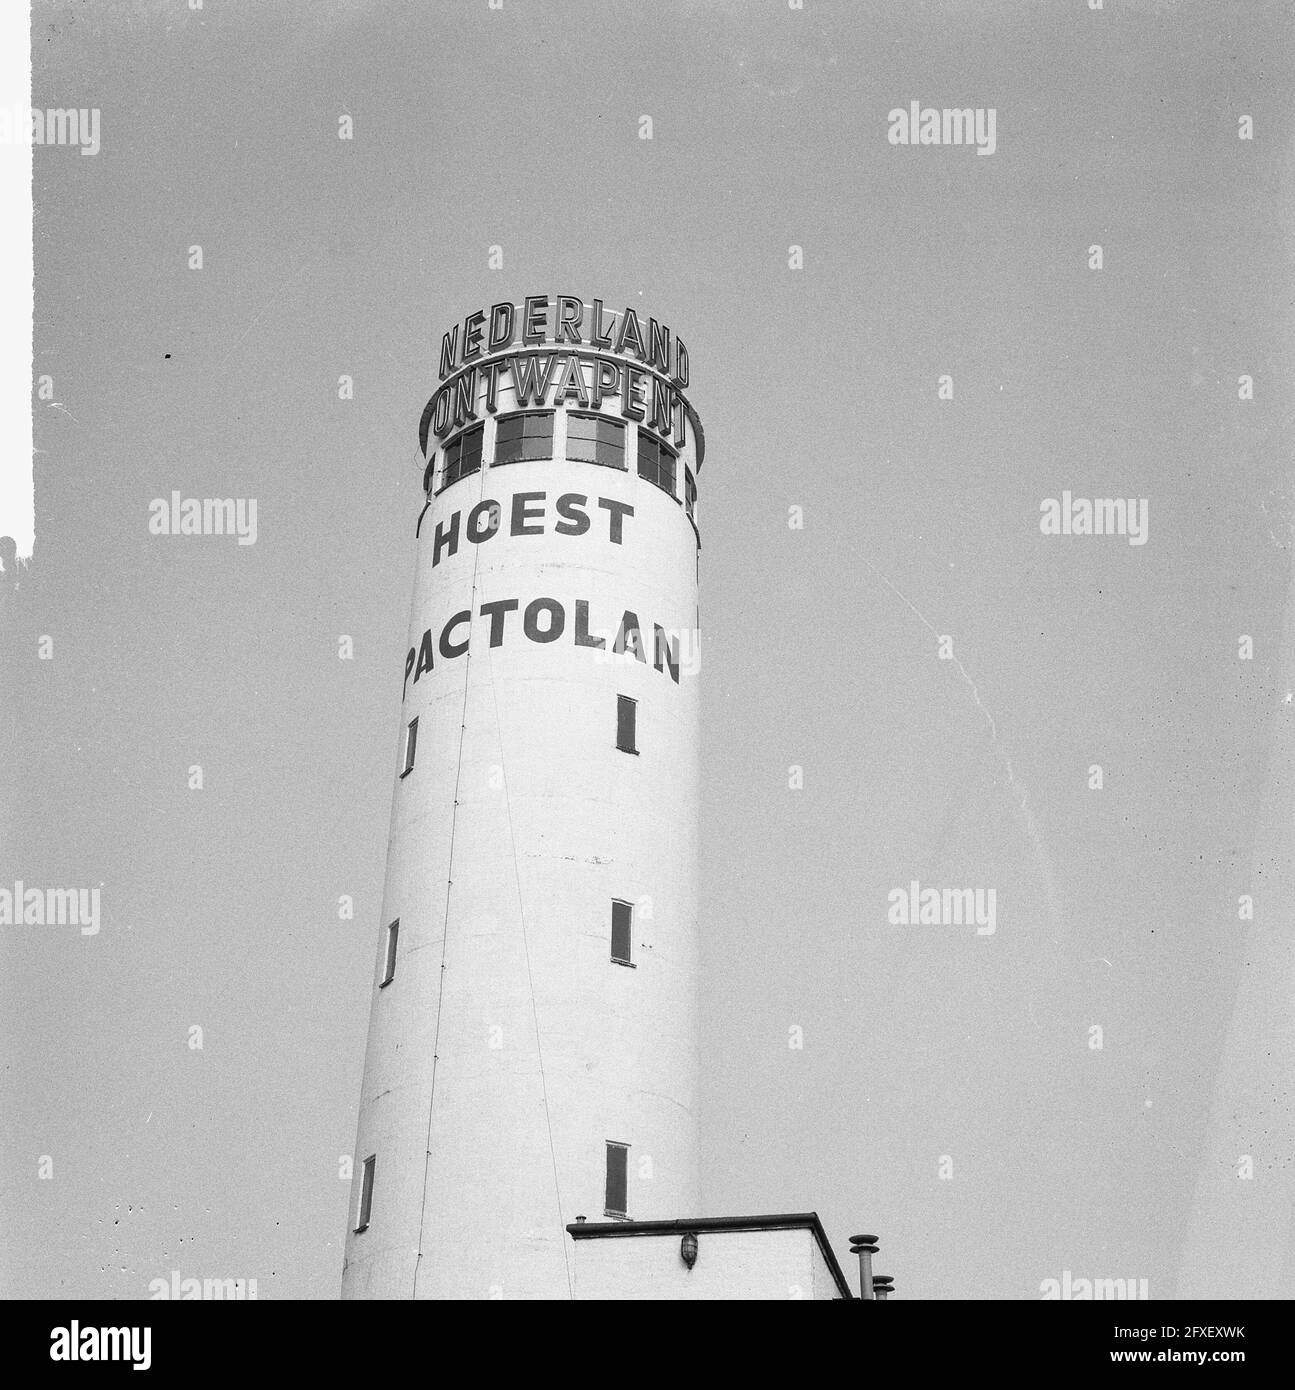 Tower with text Netherlands Disarmed near Naarden, August 9, 1965, text, towers, The Netherlands, 20th century press agency photo, news to remember, documentary, historic photography 1945-1990, visual stories, human history of the Twentieth Century, capturing moments in time Stock Photo